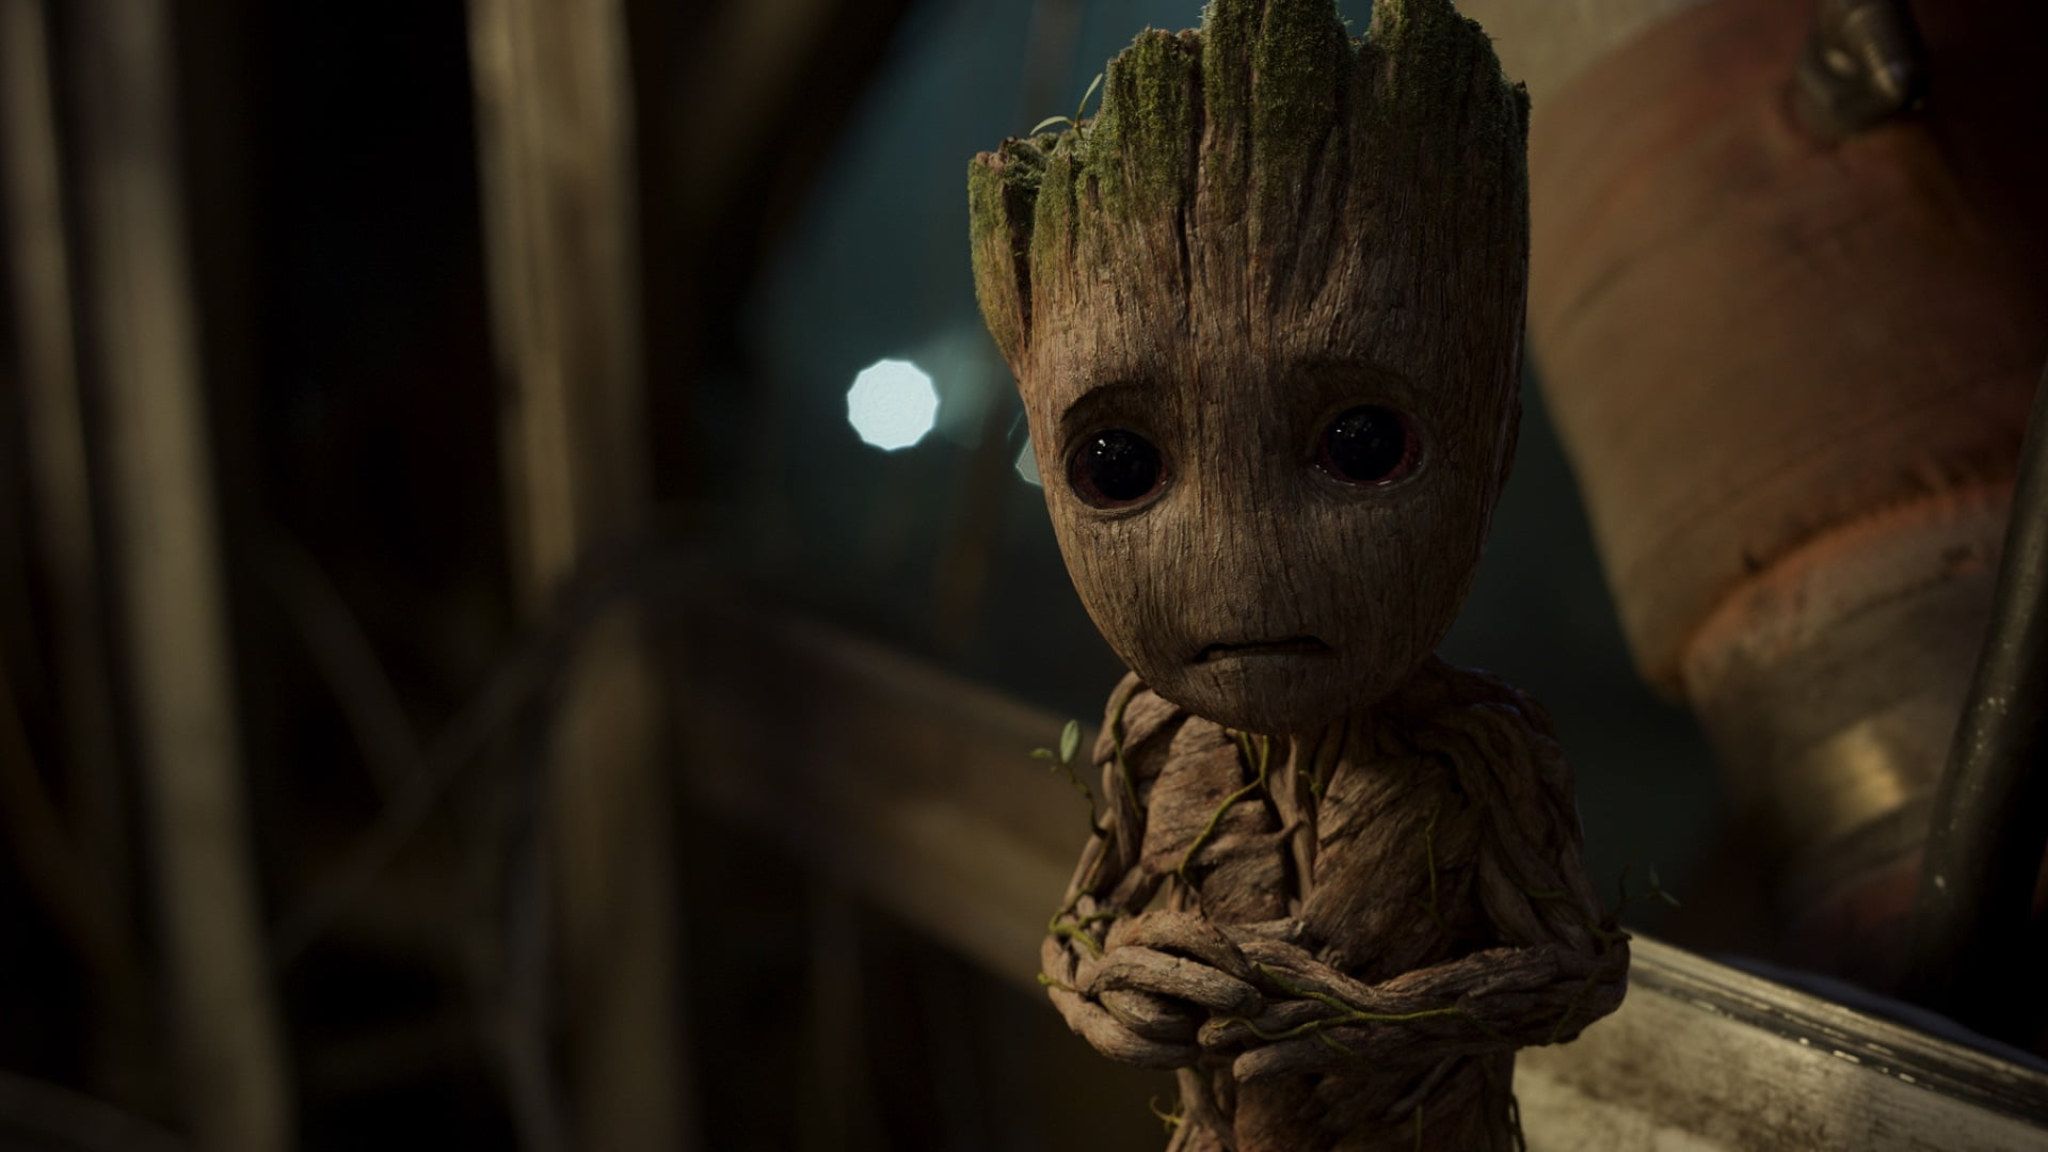 Groot character wallpaper, Guardians of the Galaxy Vol. movies, Marvel Comics • Wallpaper For You HD Wallpaper For Desktop & Mobile